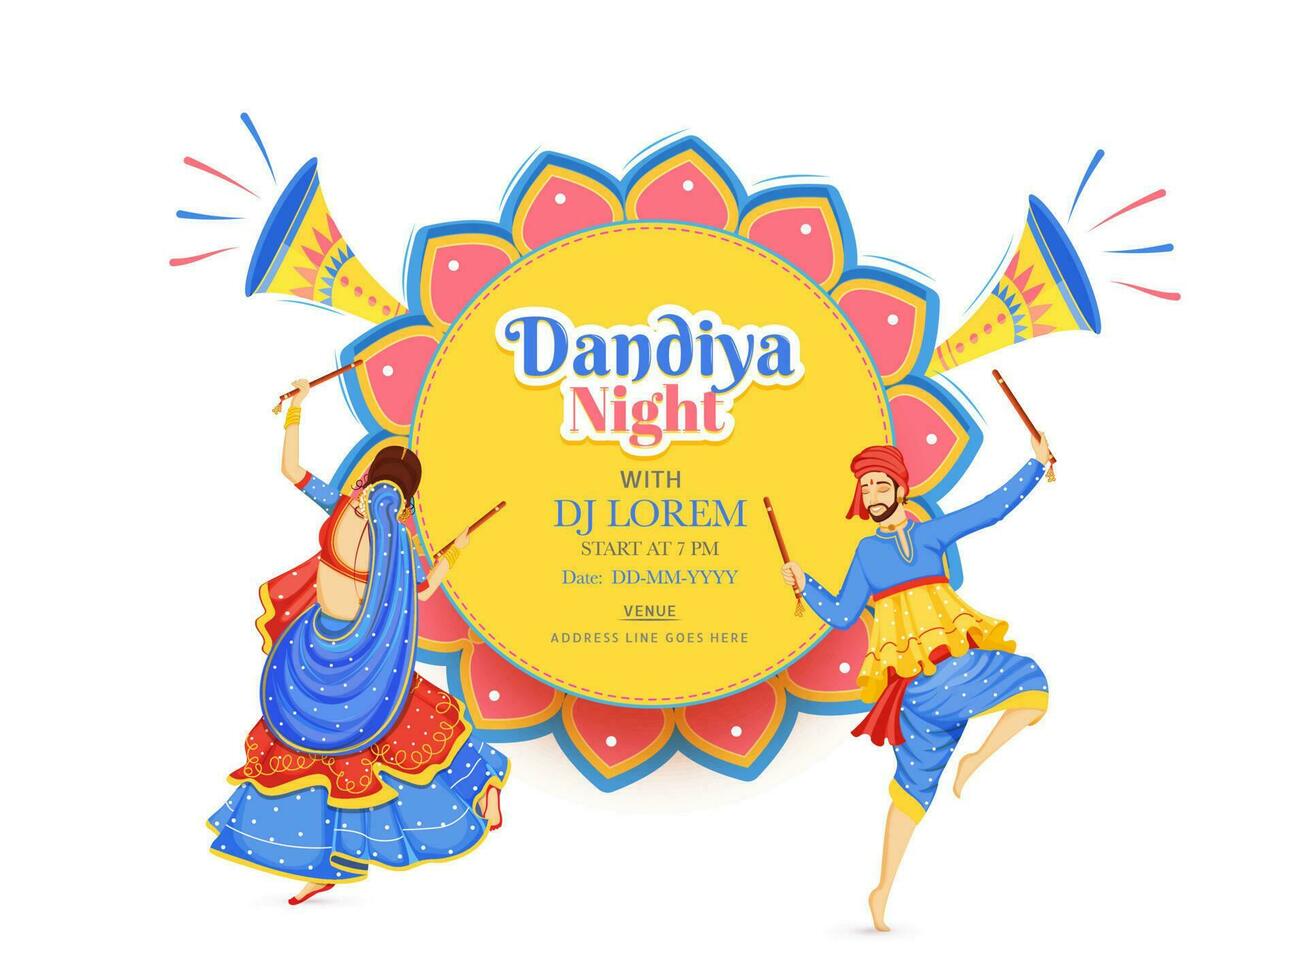 Creative Dandiya Night DJ party banner or poster design, illustration of couple dancing with dandiya stick on floral background, date, time and event detail. vector